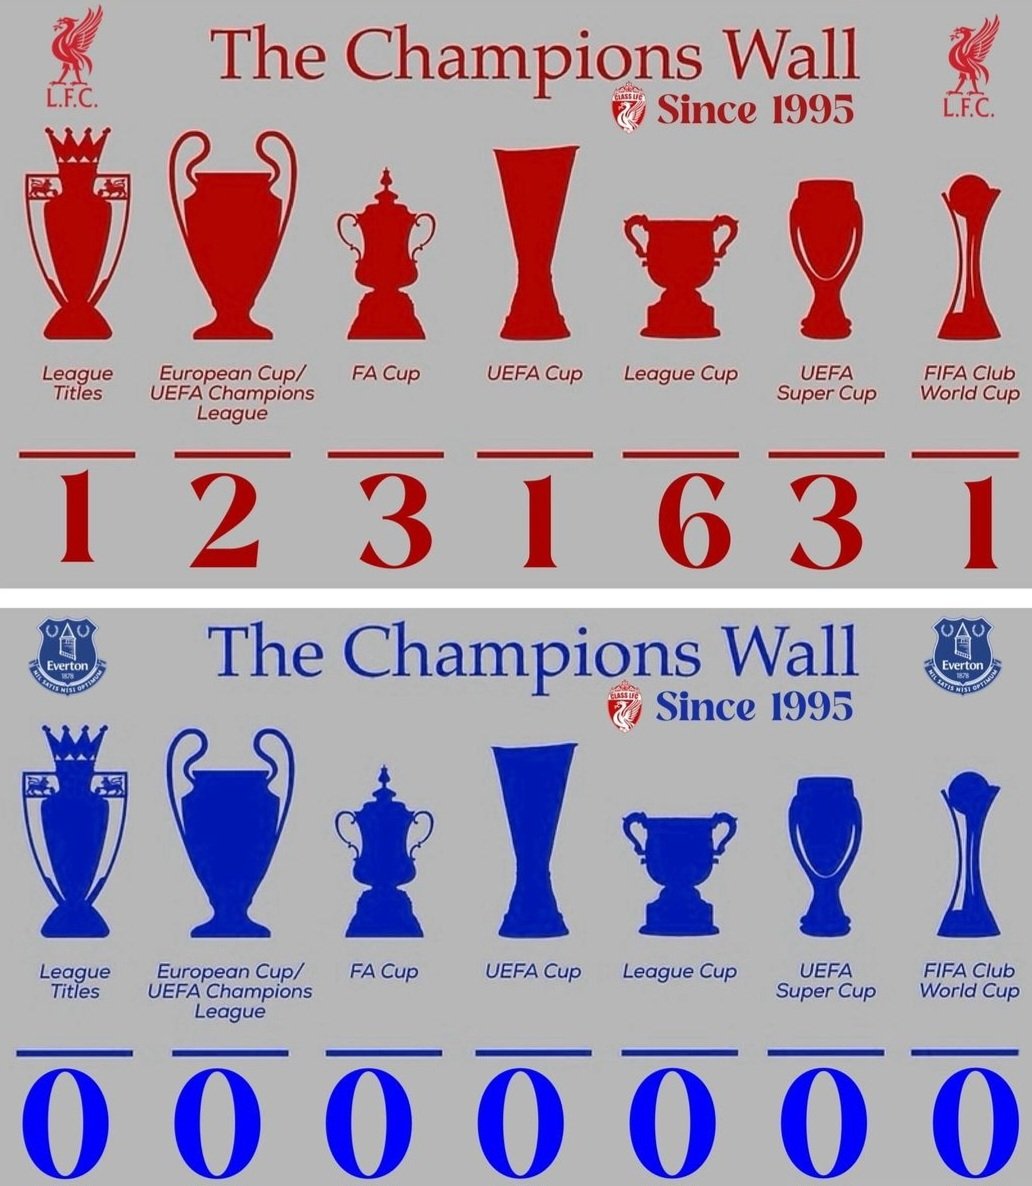 I'll just leave this here.... 🤣🤣 @LFC #YNWA #Thechampionswall